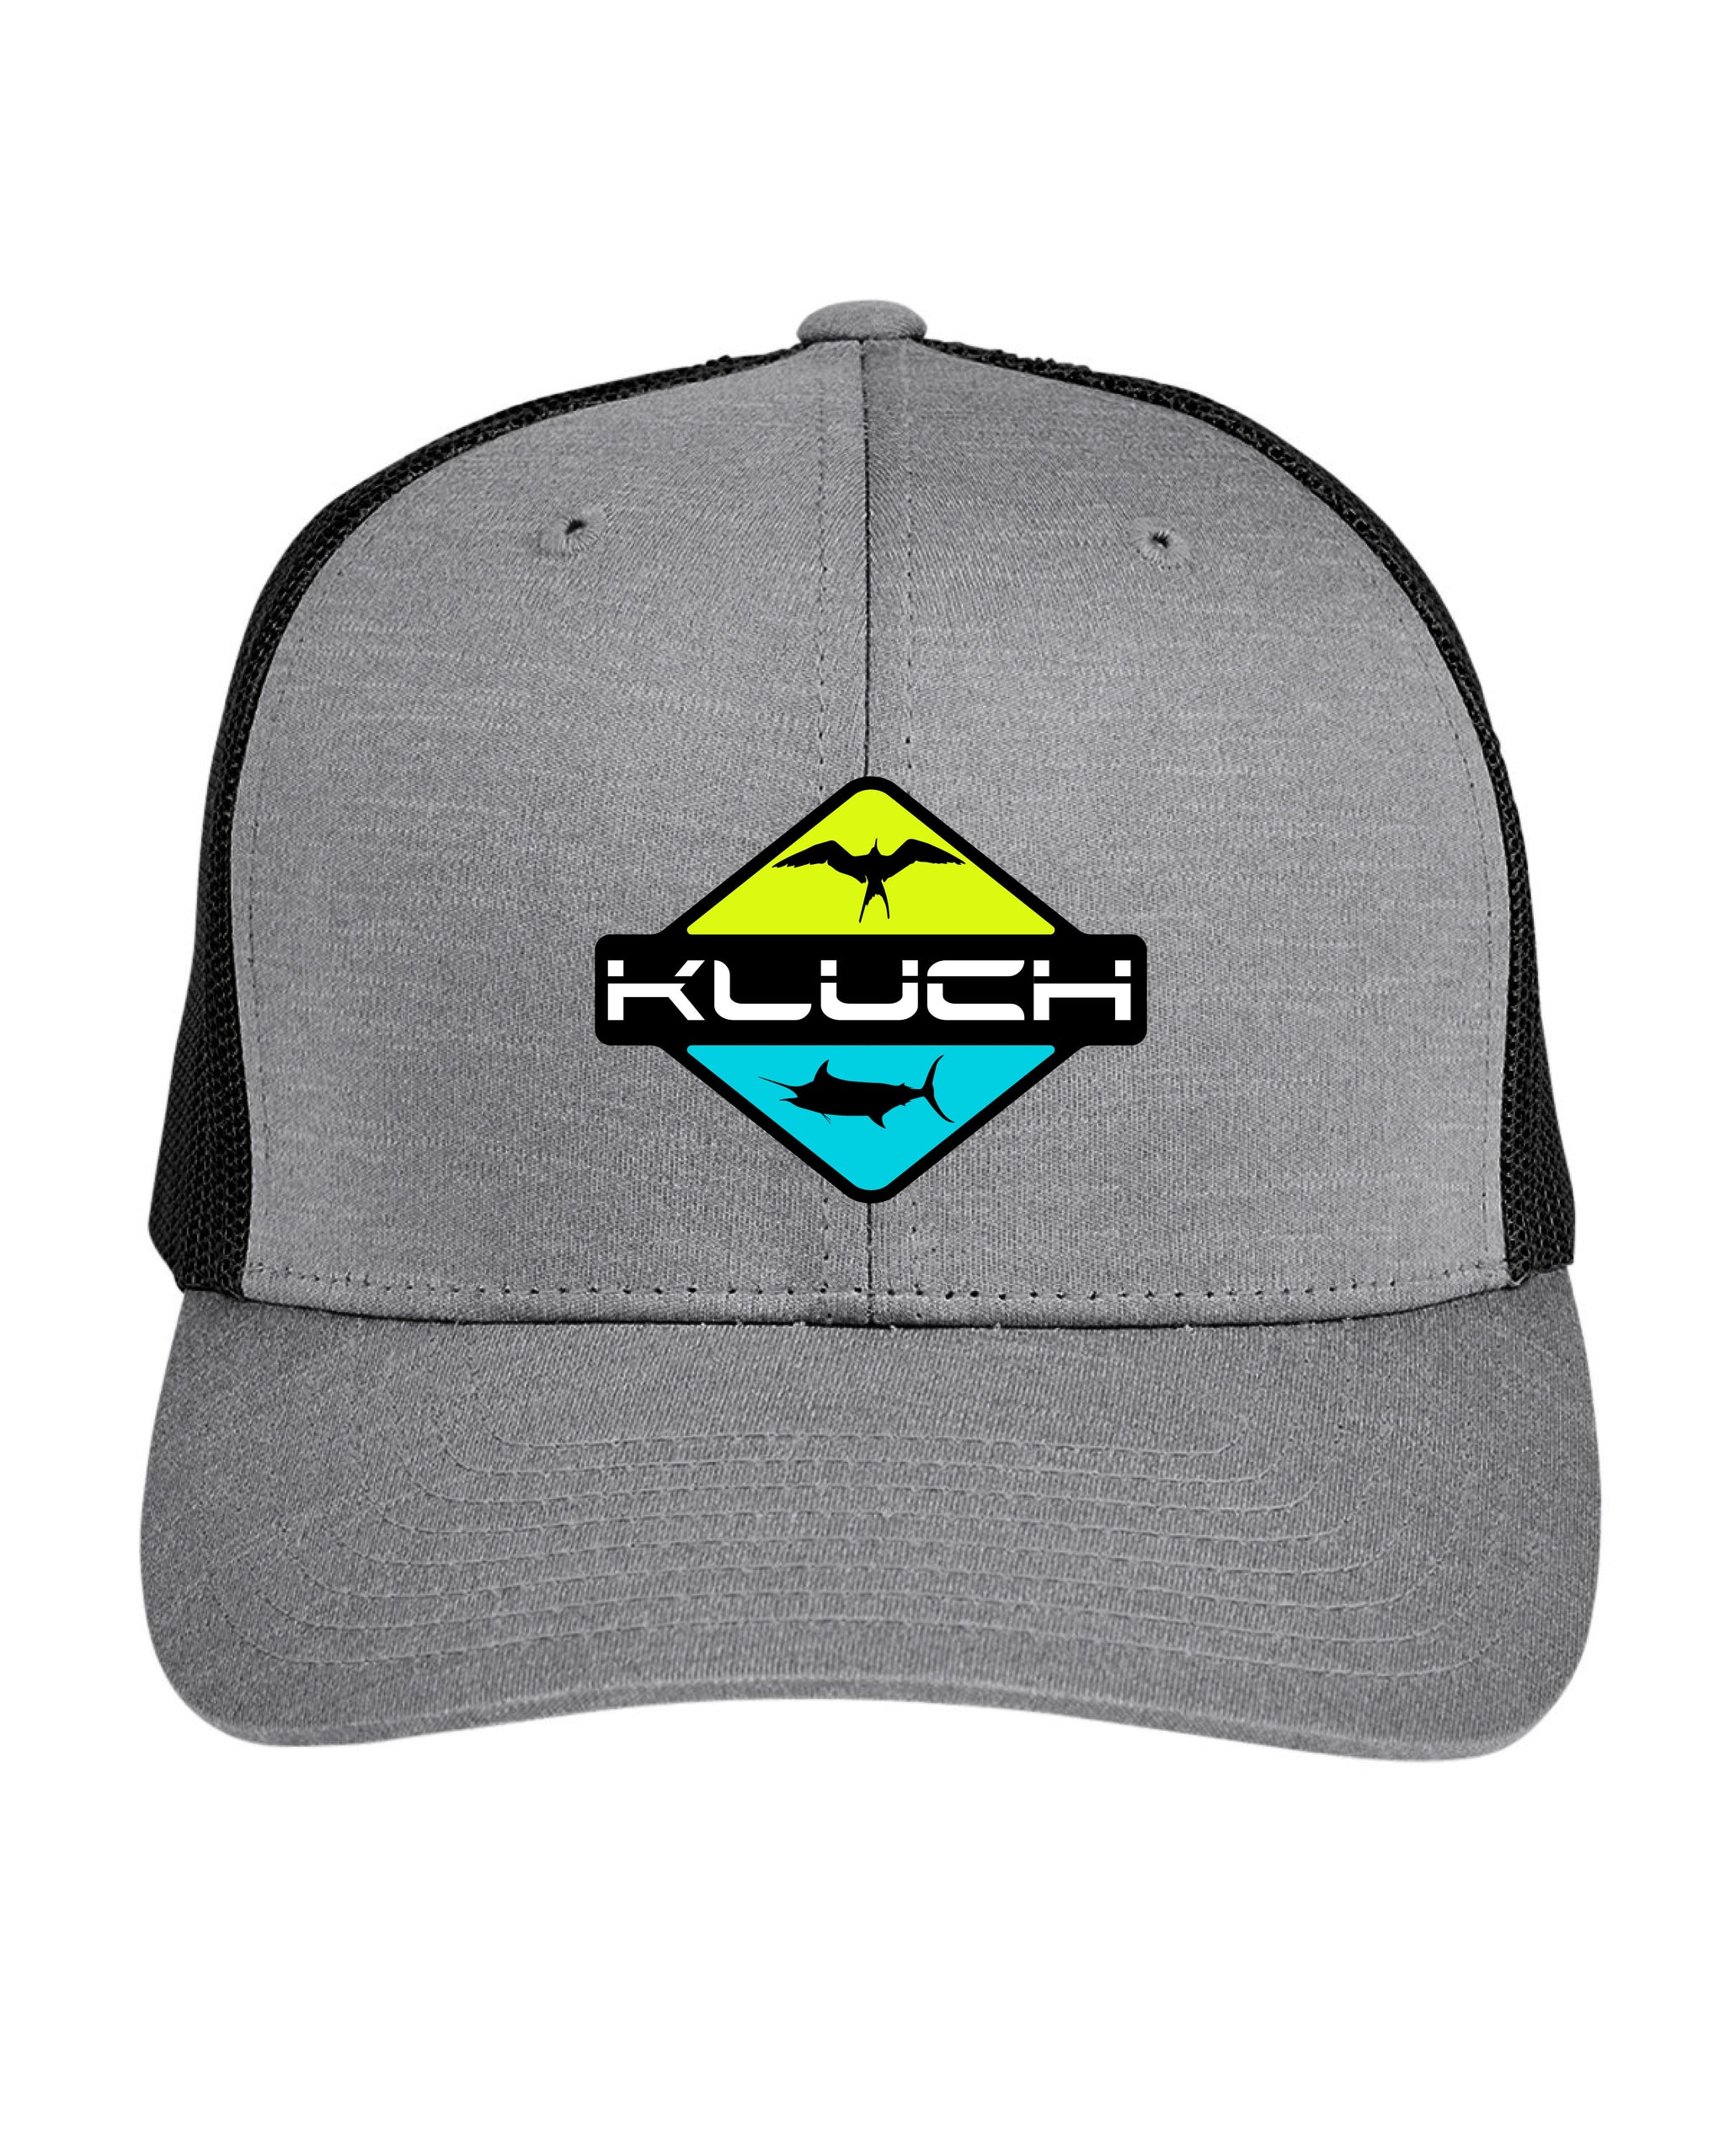 Kluch Hats - Adjustable Apparel Kluch